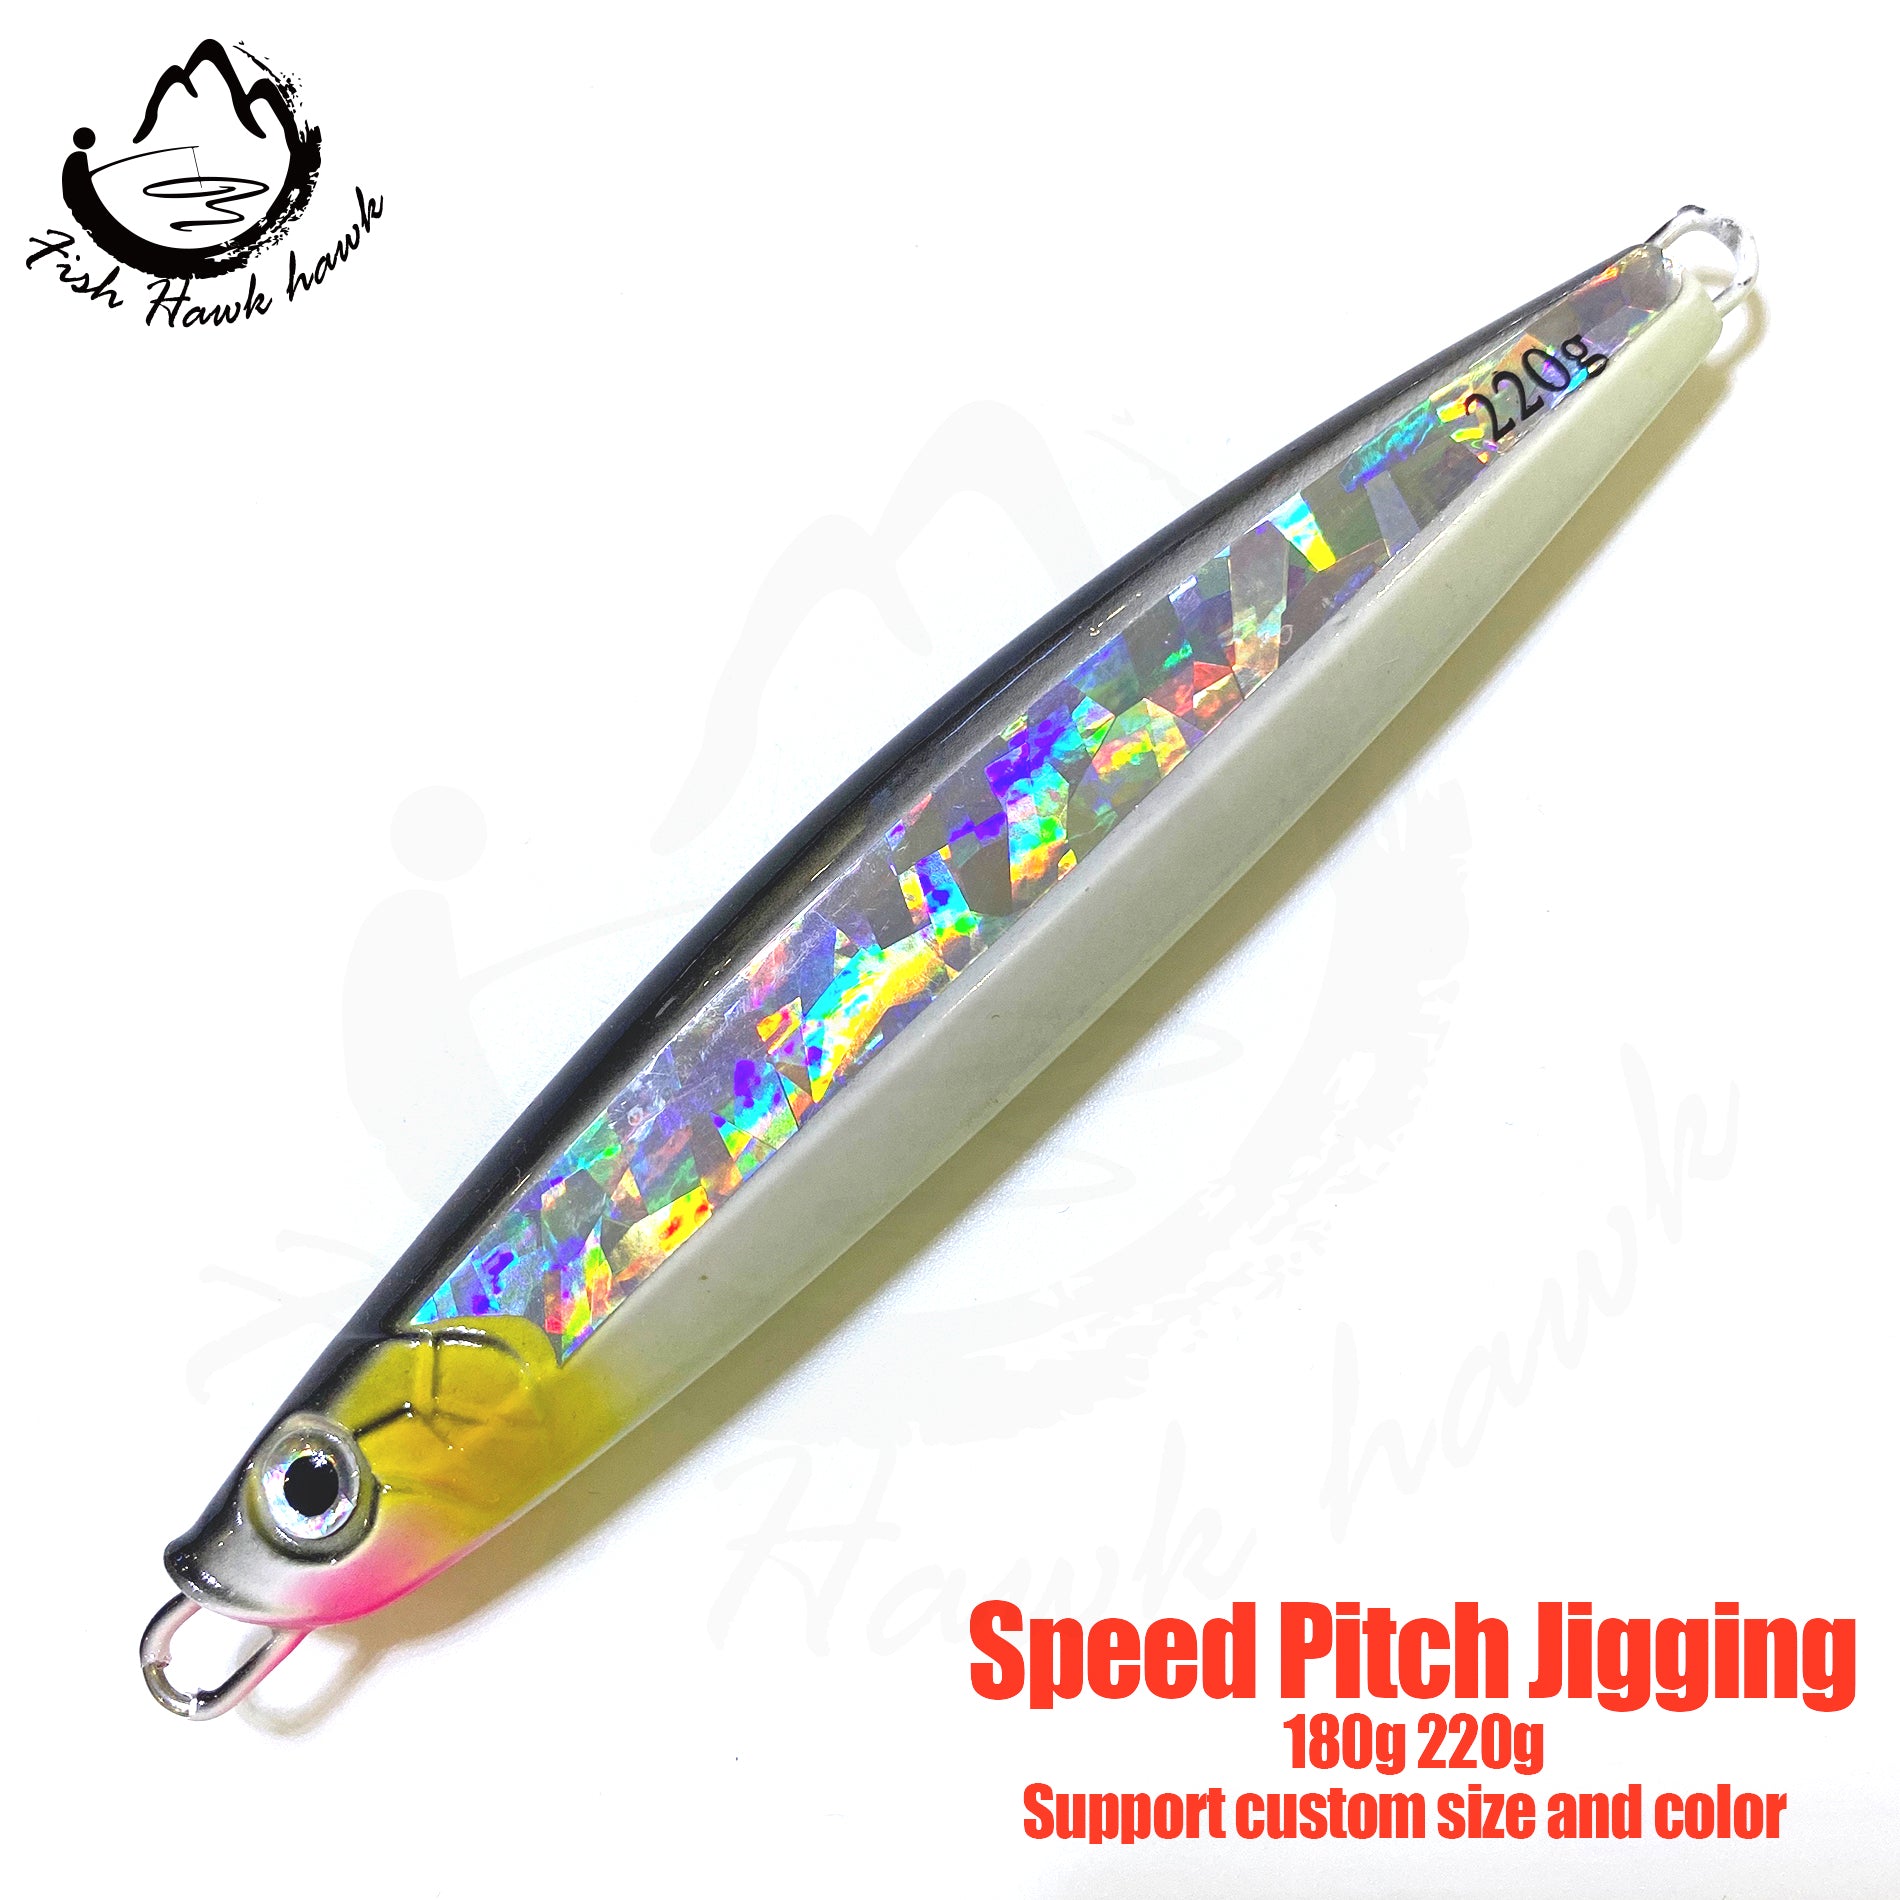 97 Slow/Speed Pitch Jigs Bait 180g 220g – Jigs Fishing Tackle Store